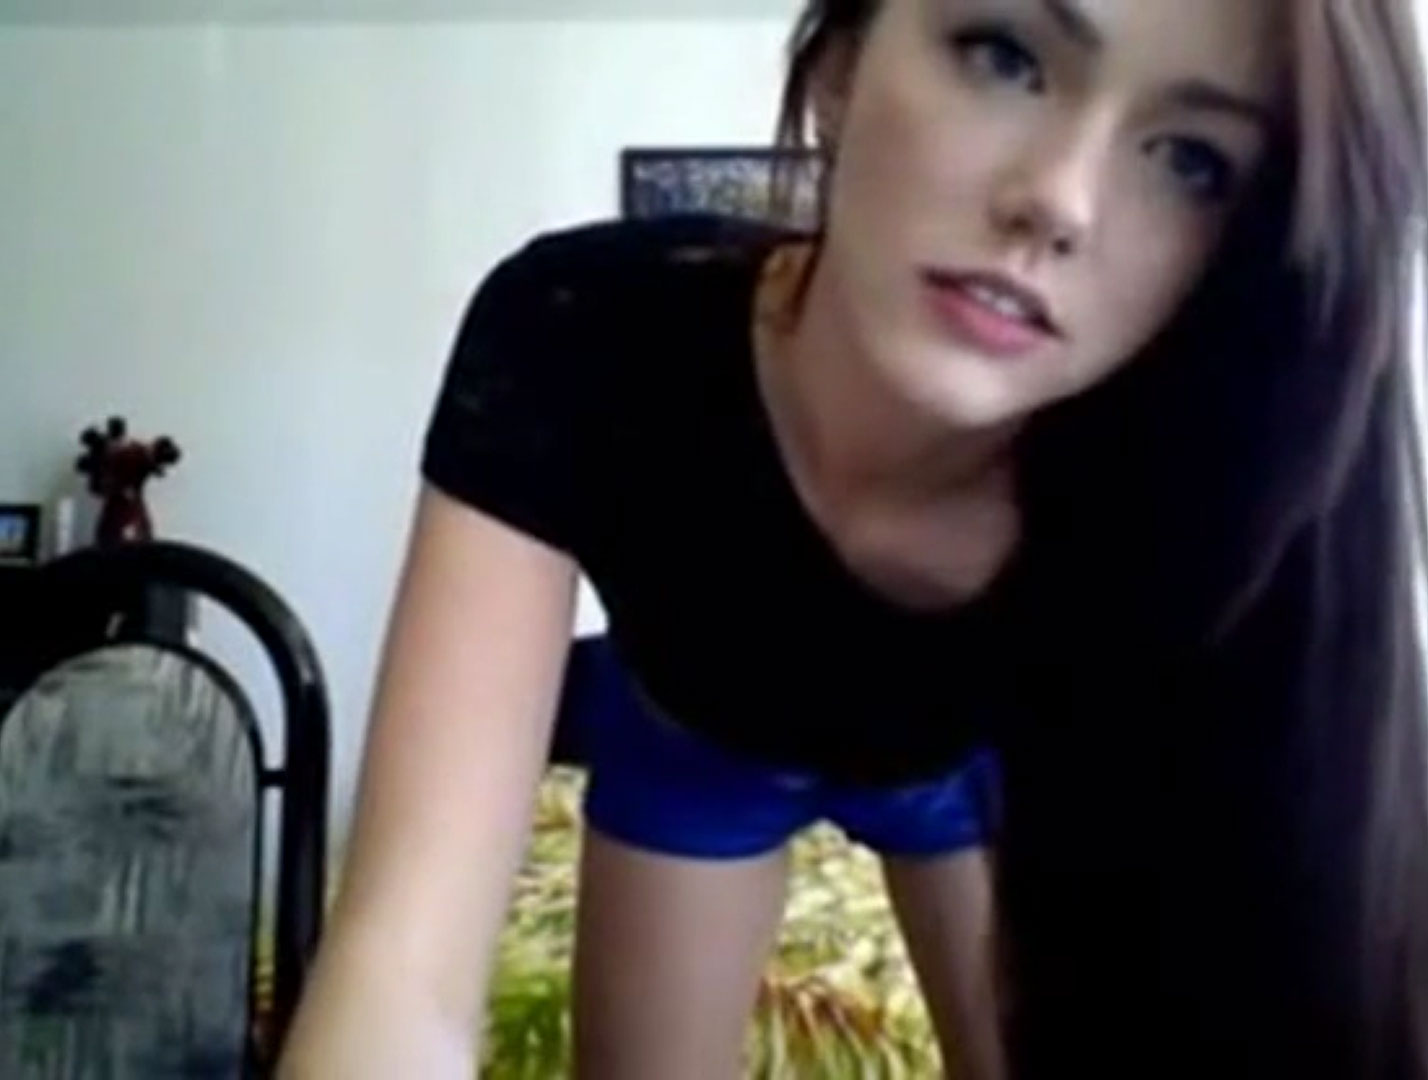 Teen Girl Streaming Her Rubbing Her Tight Pussy